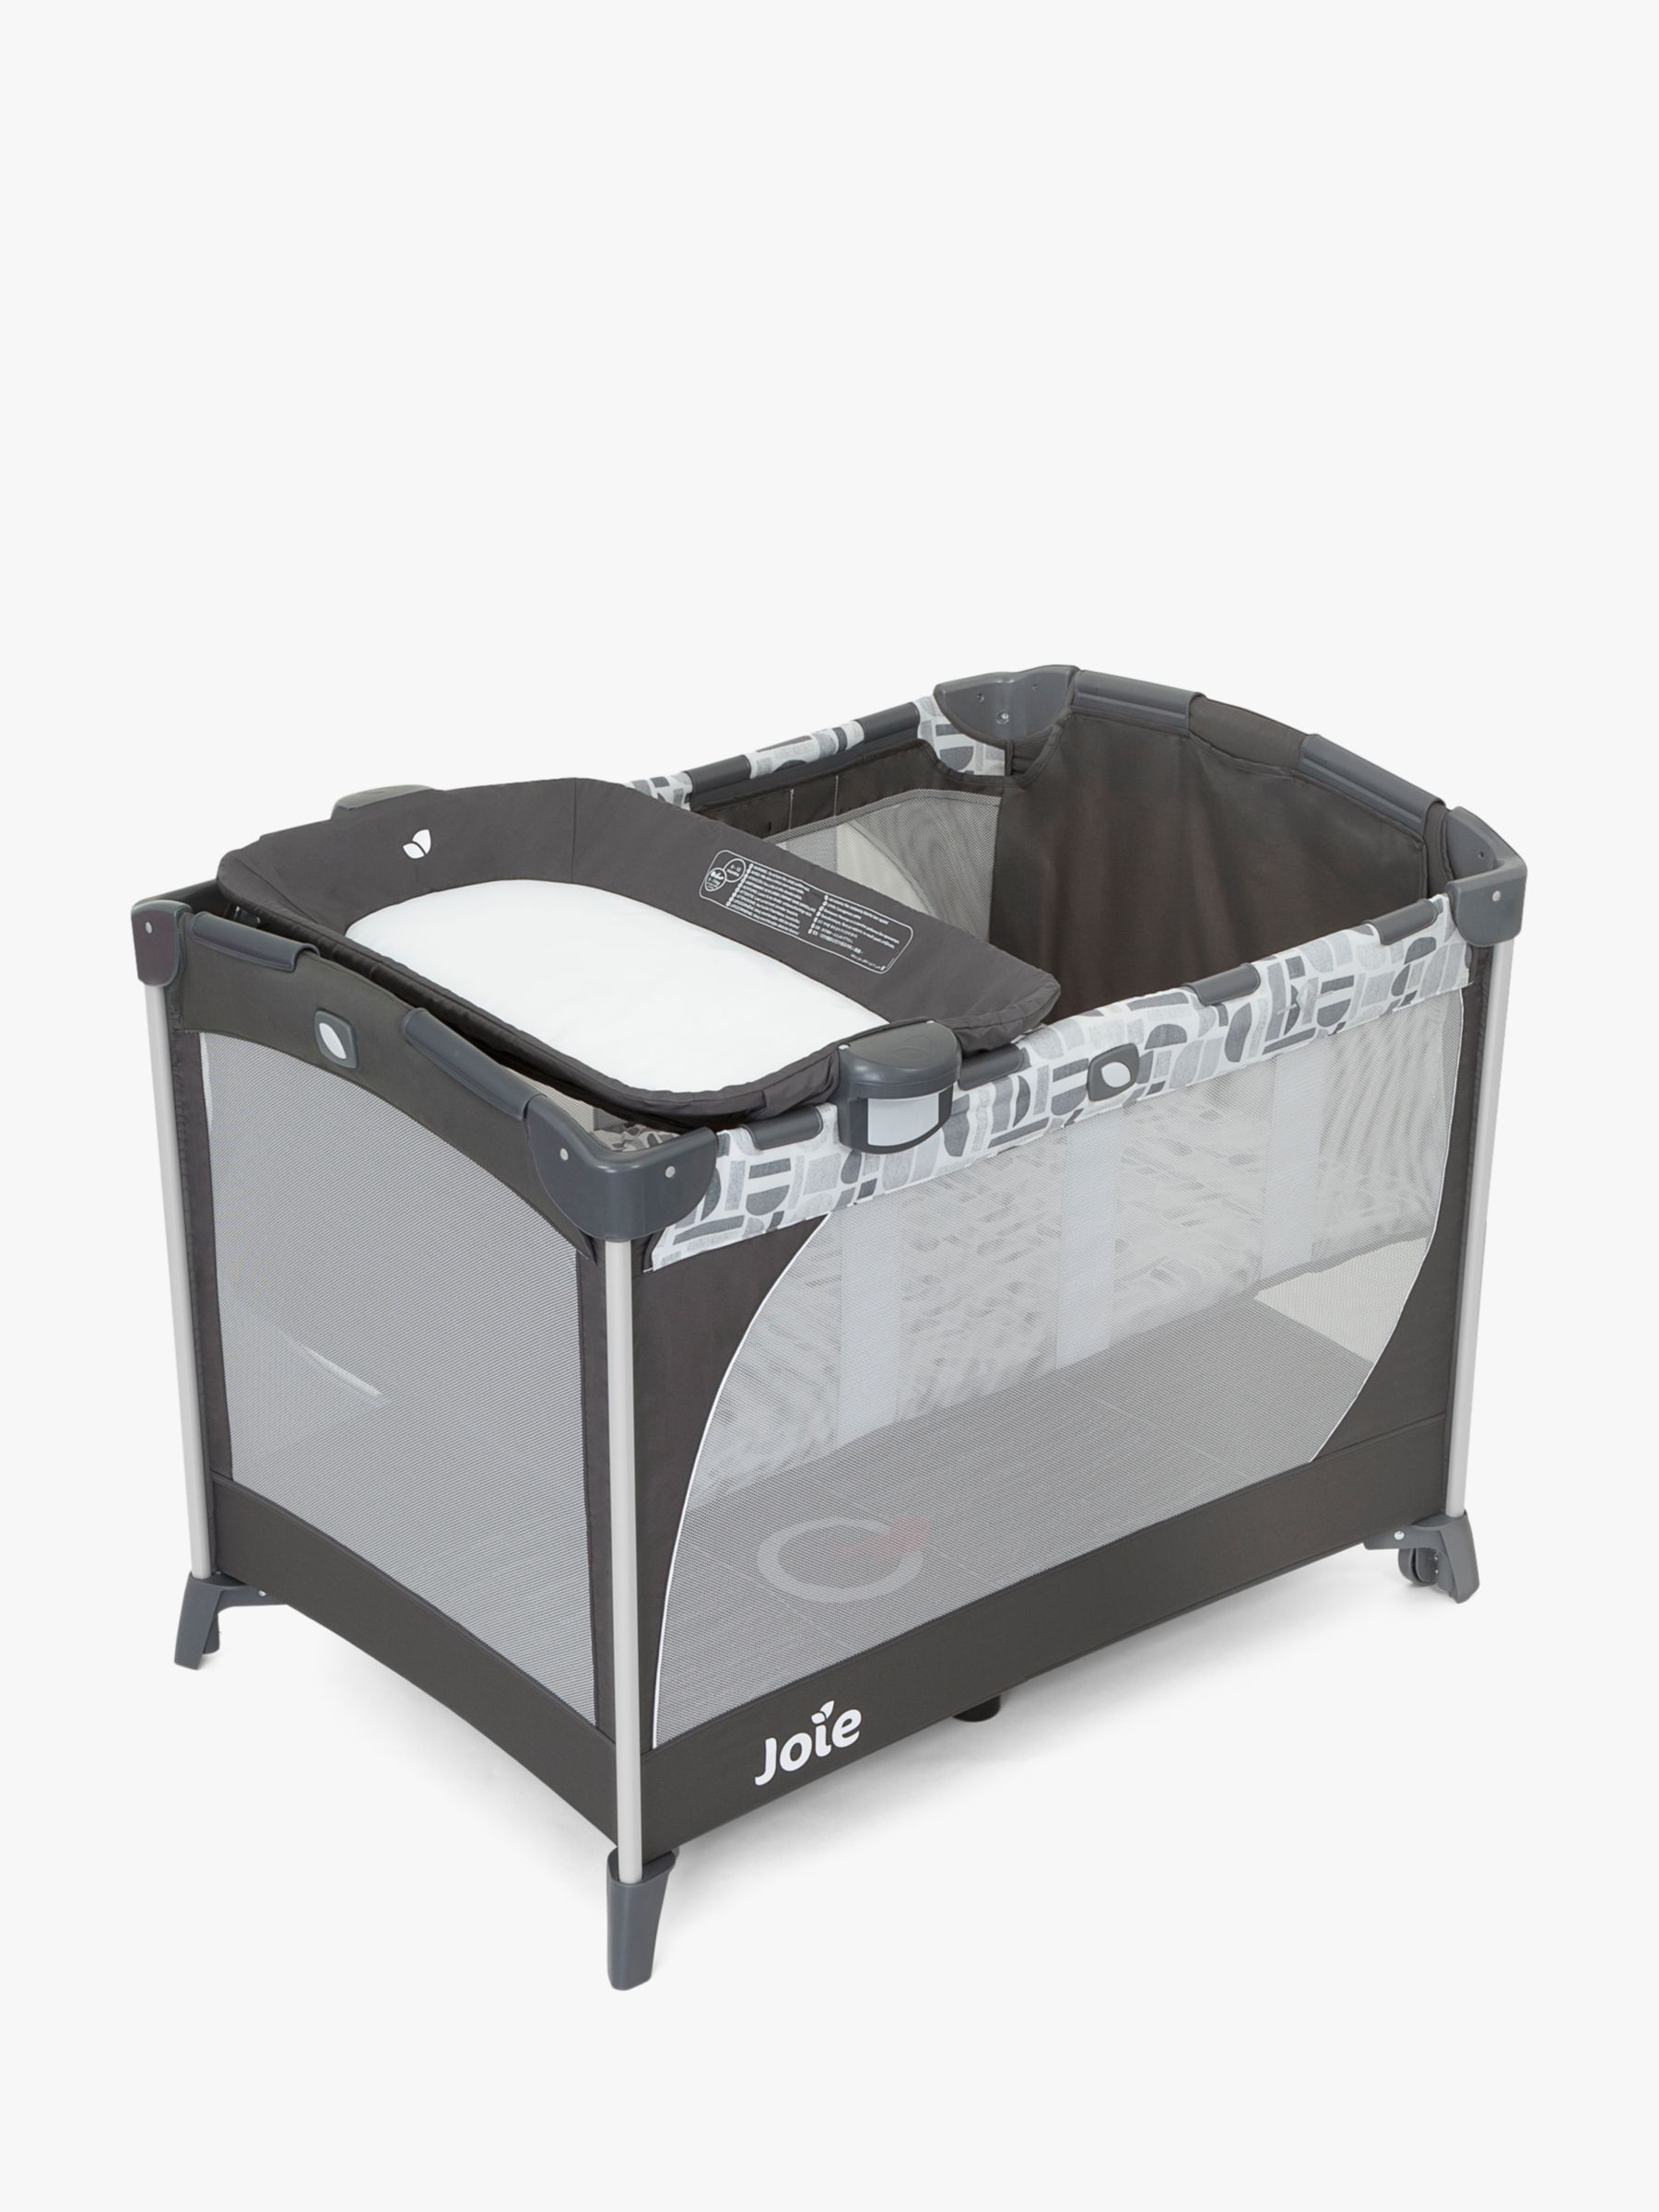 joie travel cot sheet size